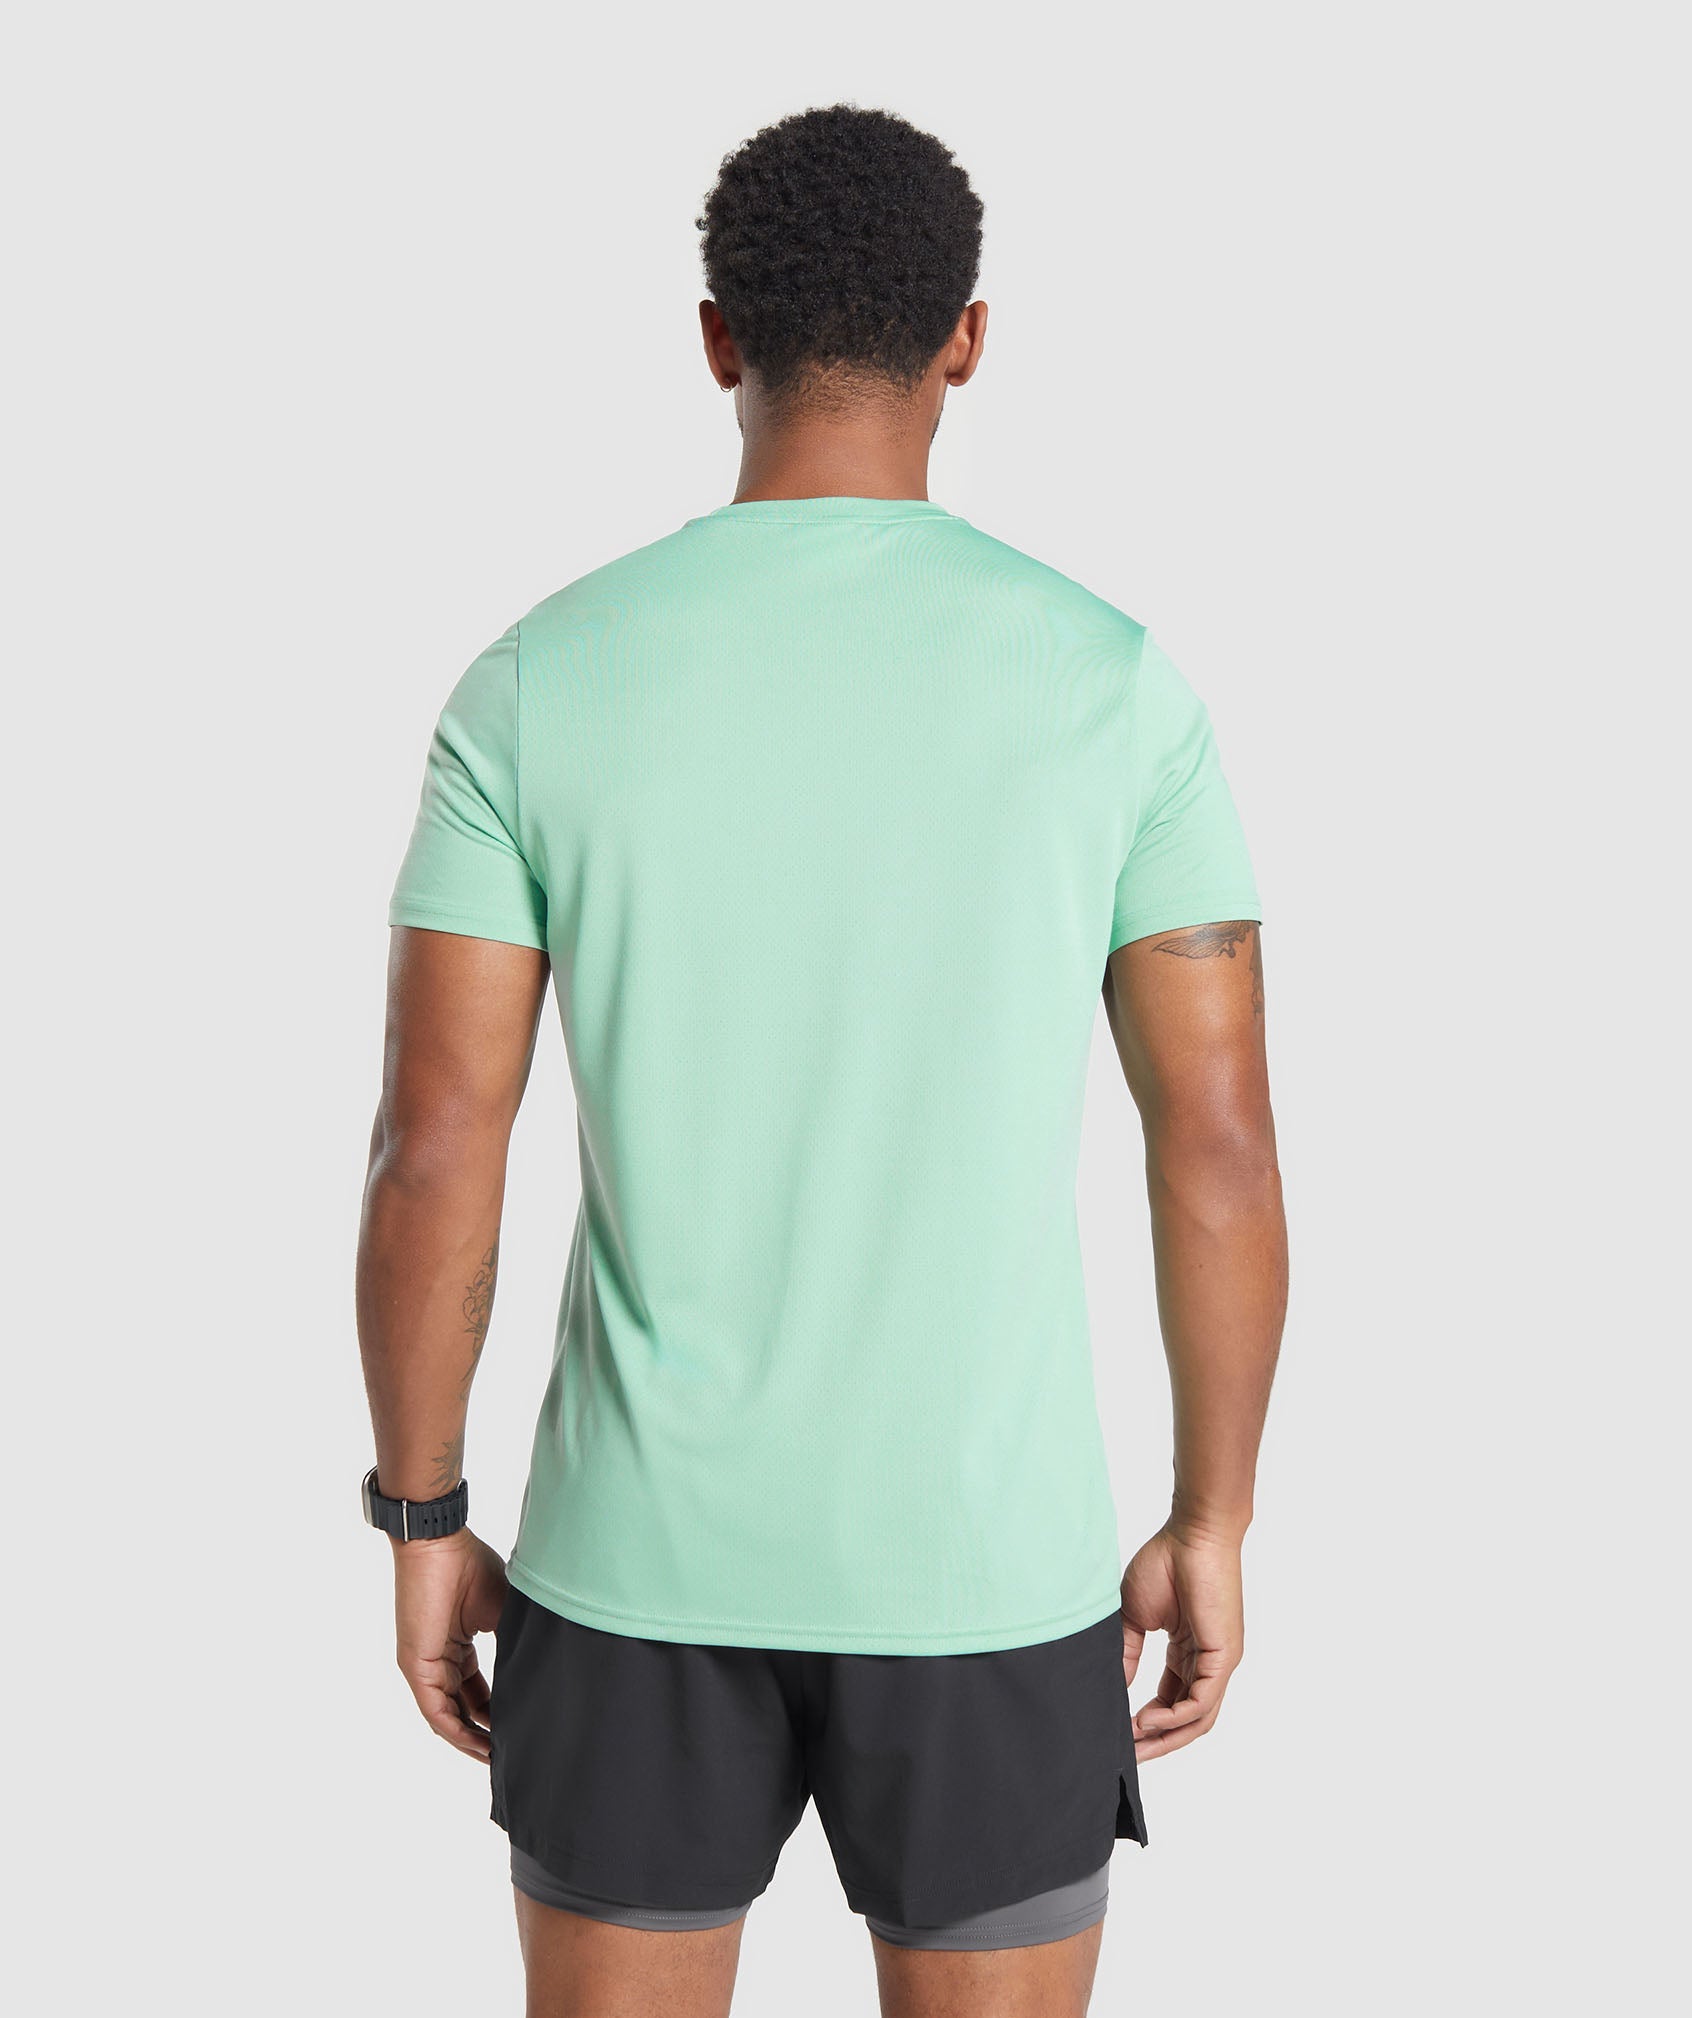 Arrival T-Shirt in Lido Green - view 2